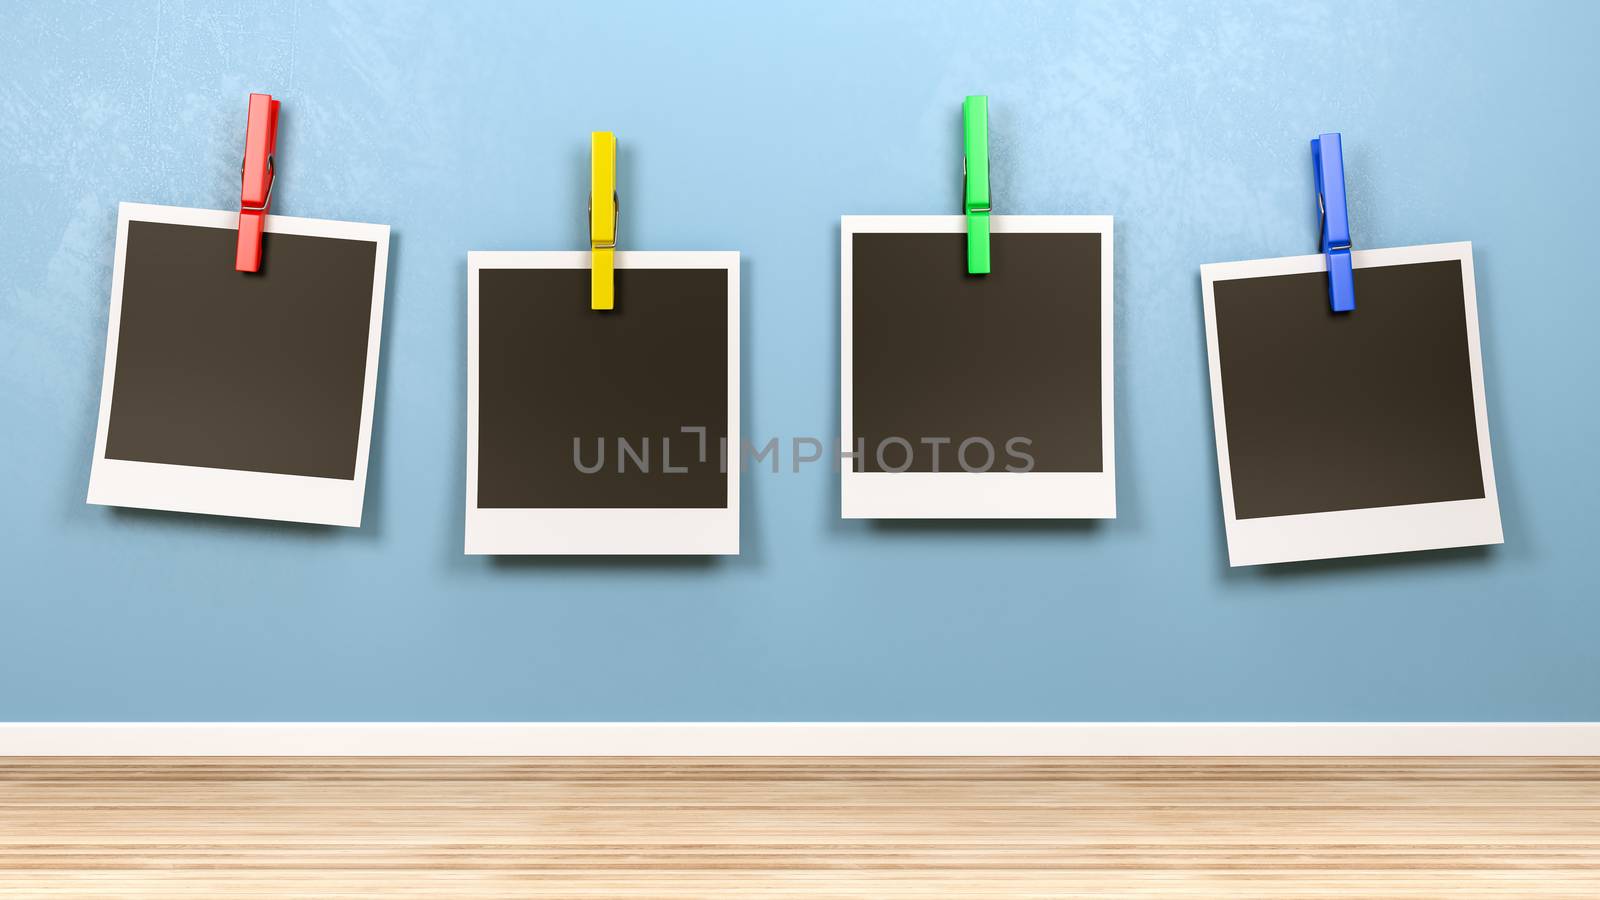 Four Empty Picture Frames Old Style Instant Photo with Colorful Clothespin Against Blue Wall in the Room 3D Illustration